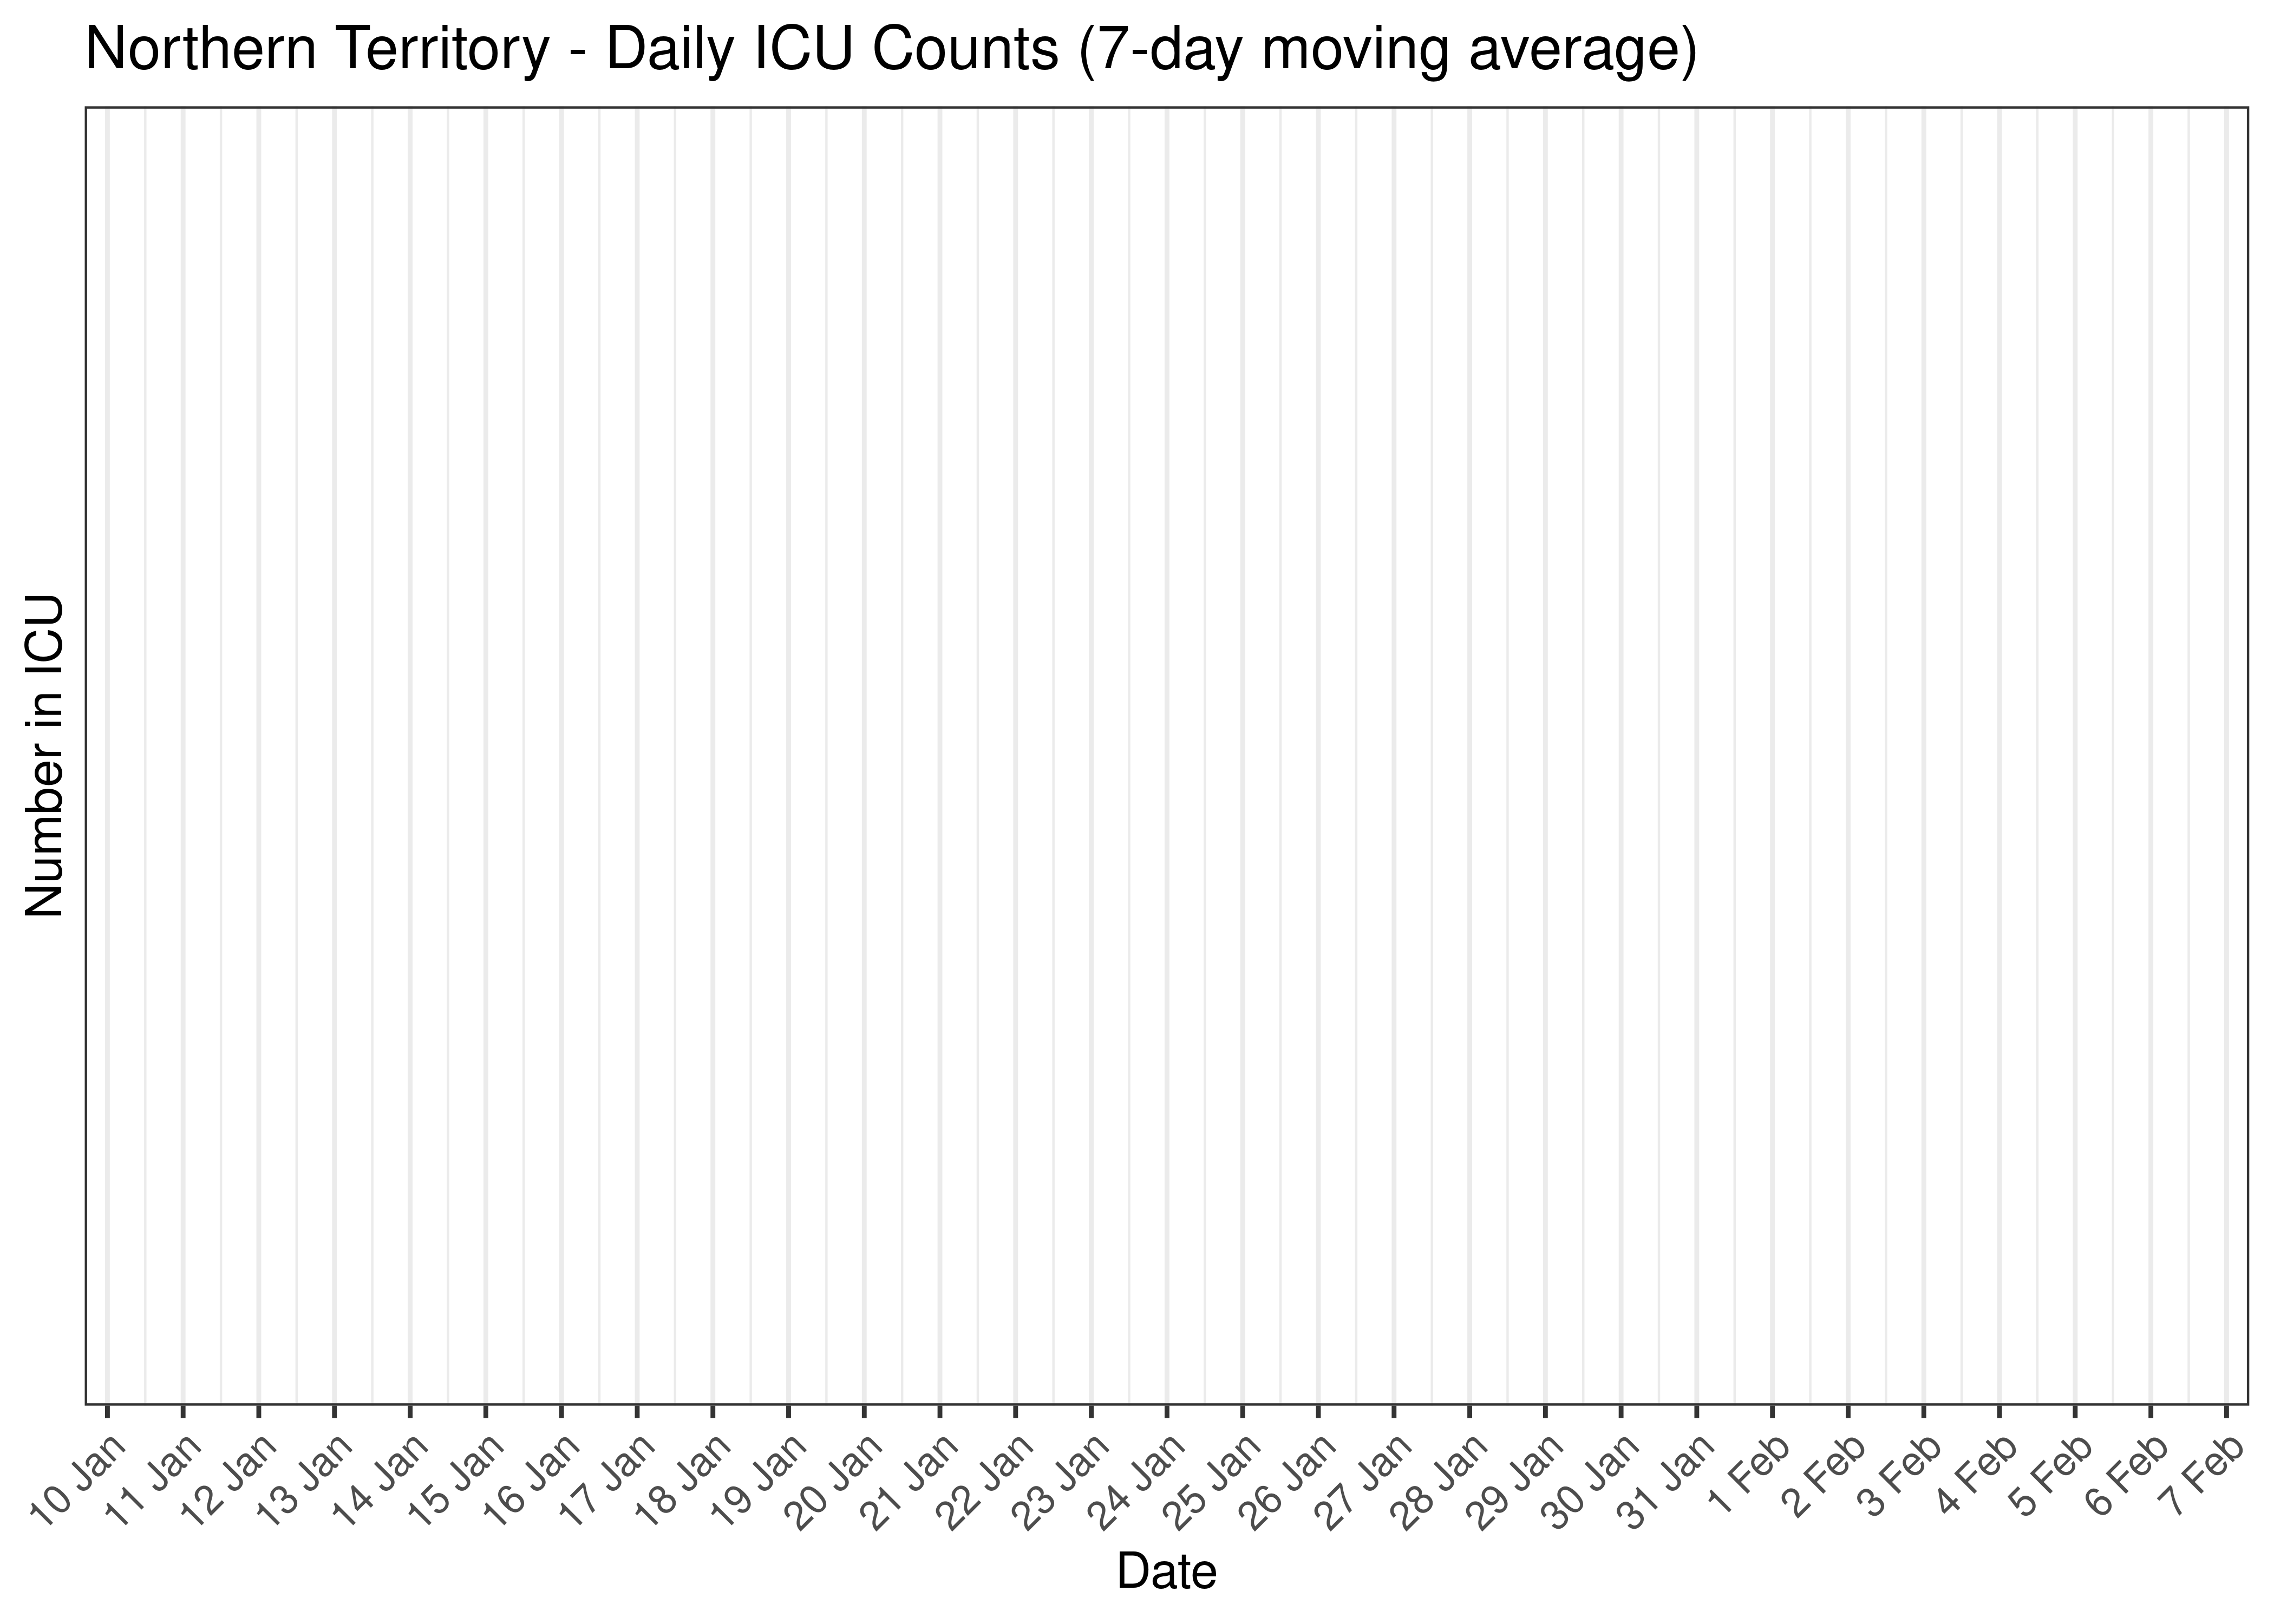 Northern Territory - Daily Cases for Last 30-days (7-day moving average)